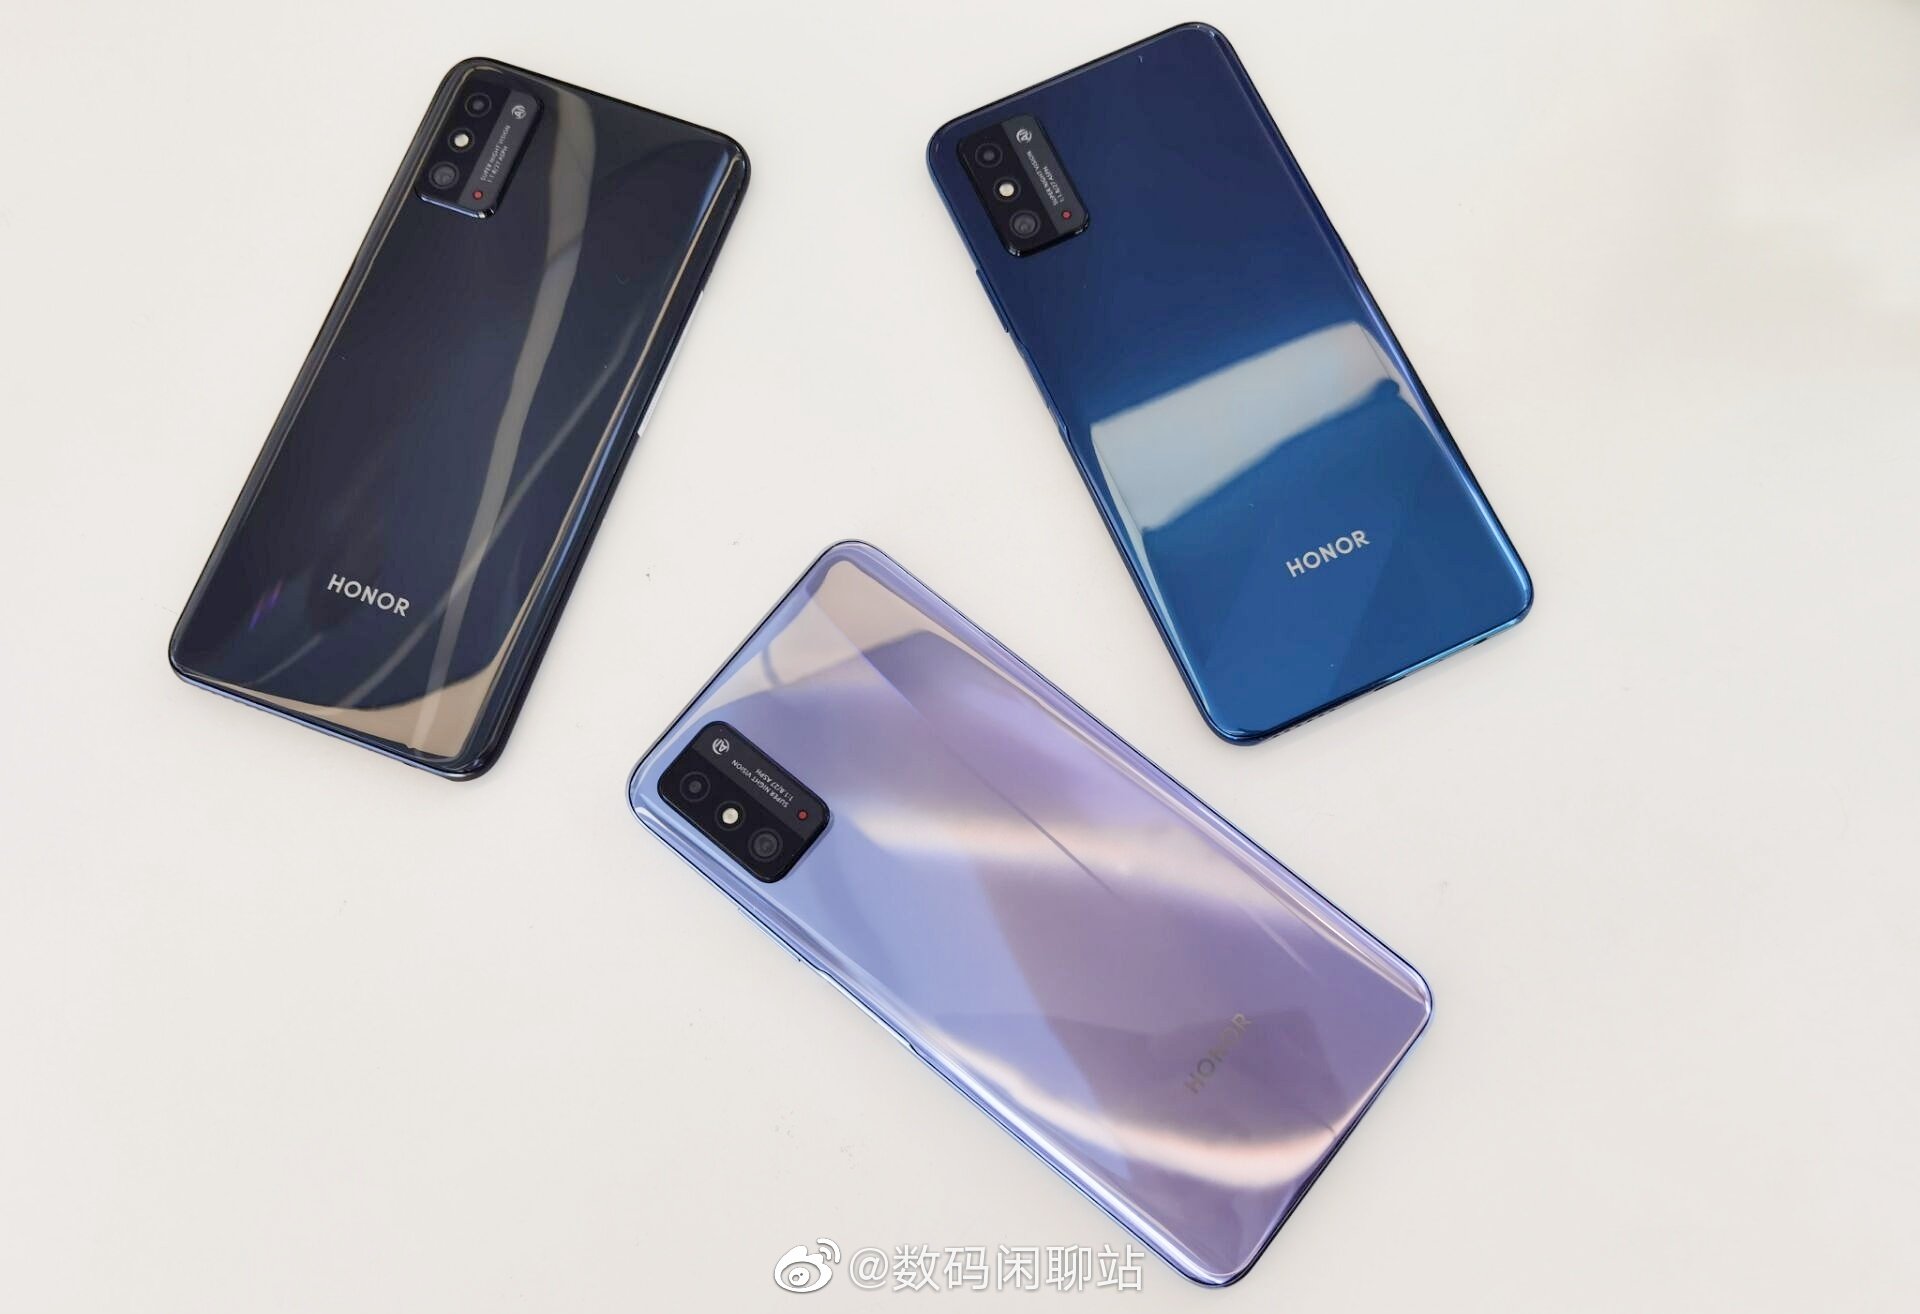 Honor X10 Max live photos posted on Weibo show off all colors